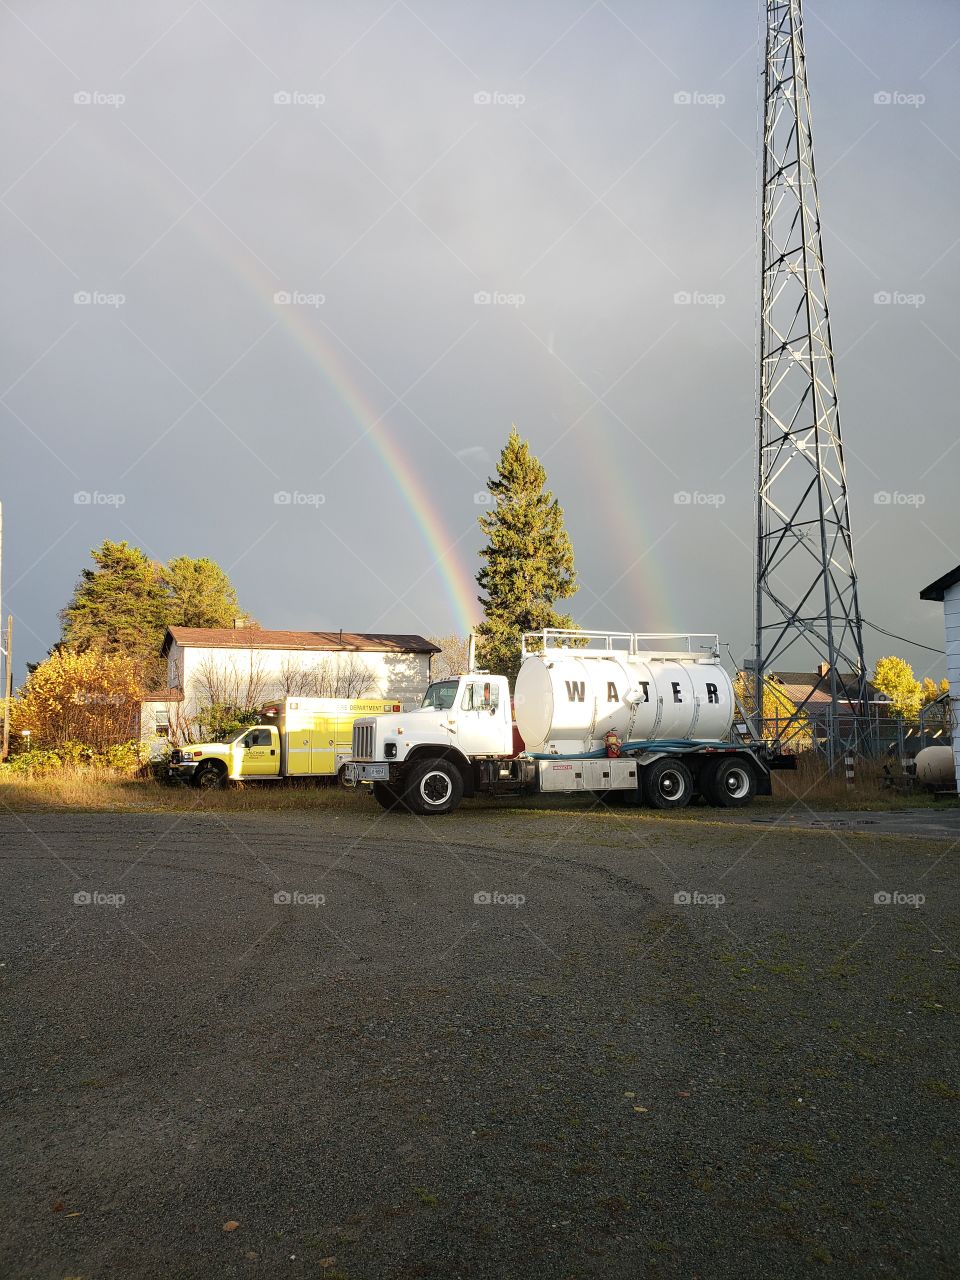 beautifull picture after a rainy autumns day with a double rainbow.